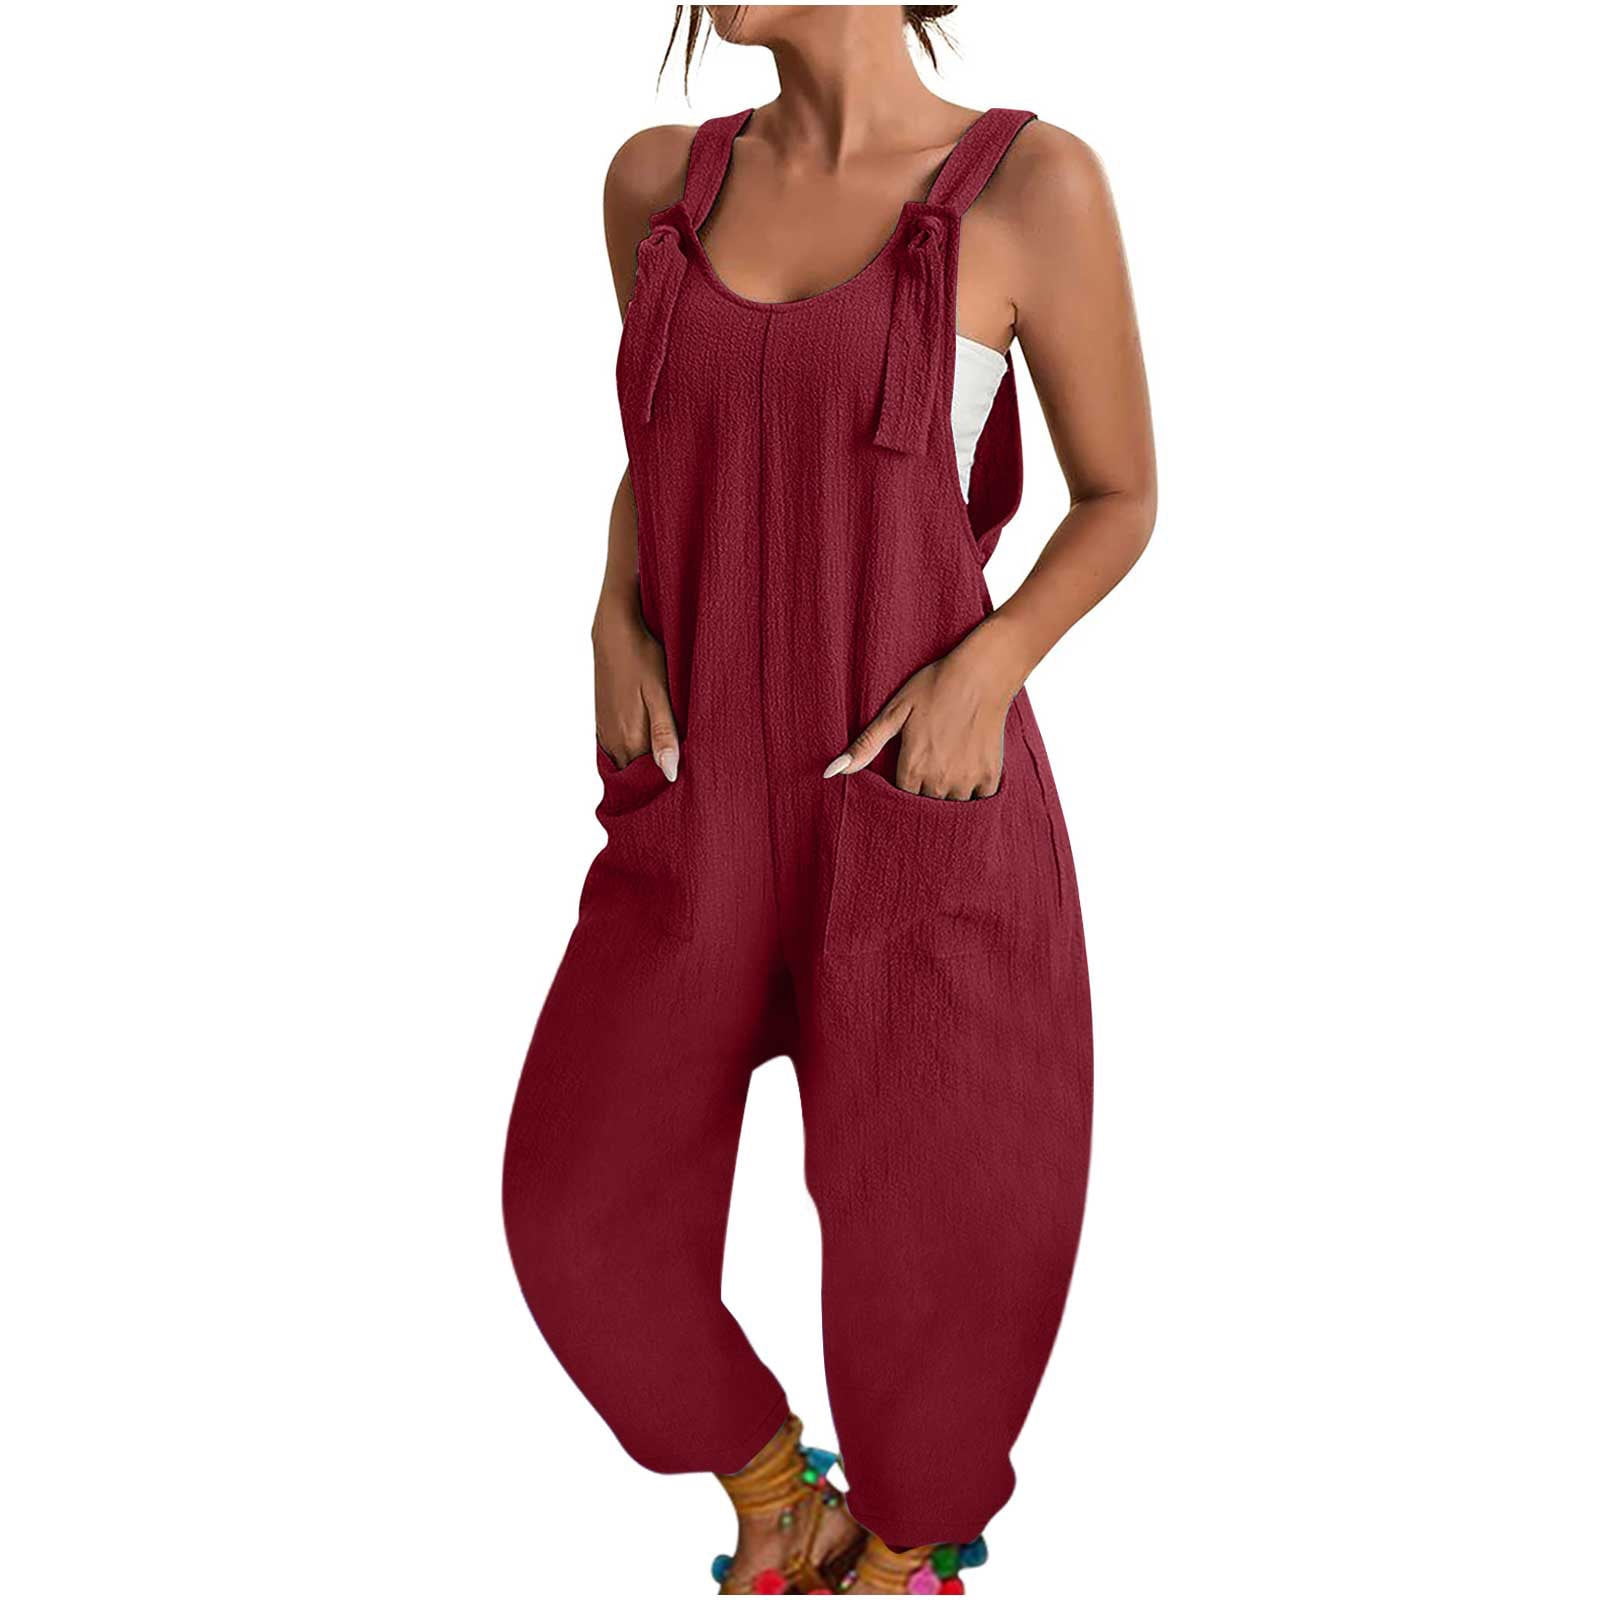 Oalirro Utility Jumpsuit Women Casual Sleeveless Womens Rompers and ...